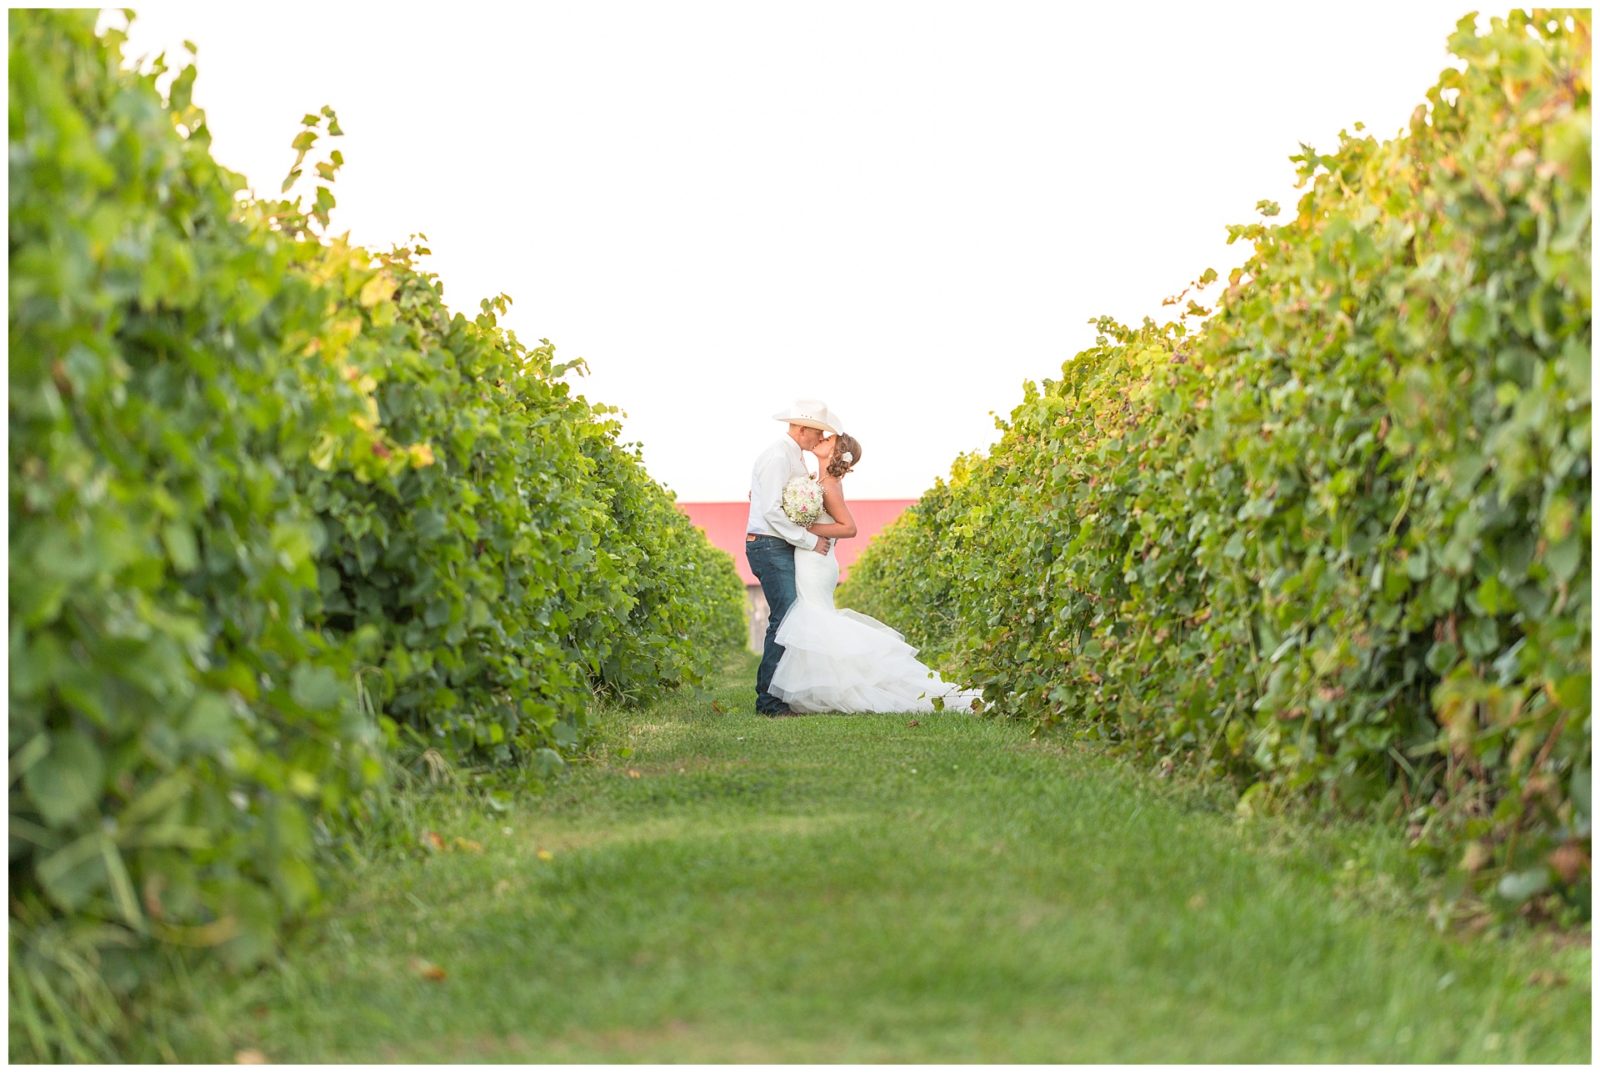 Beautiful outdoor wedding at Talon Winery in Lexington, Kentucky. The vineyards, rolling hills, barns, and lake are absolutely stunning during golden hour. Photo by: Kevin and Anna Photography www.kevinandannaweddings.com